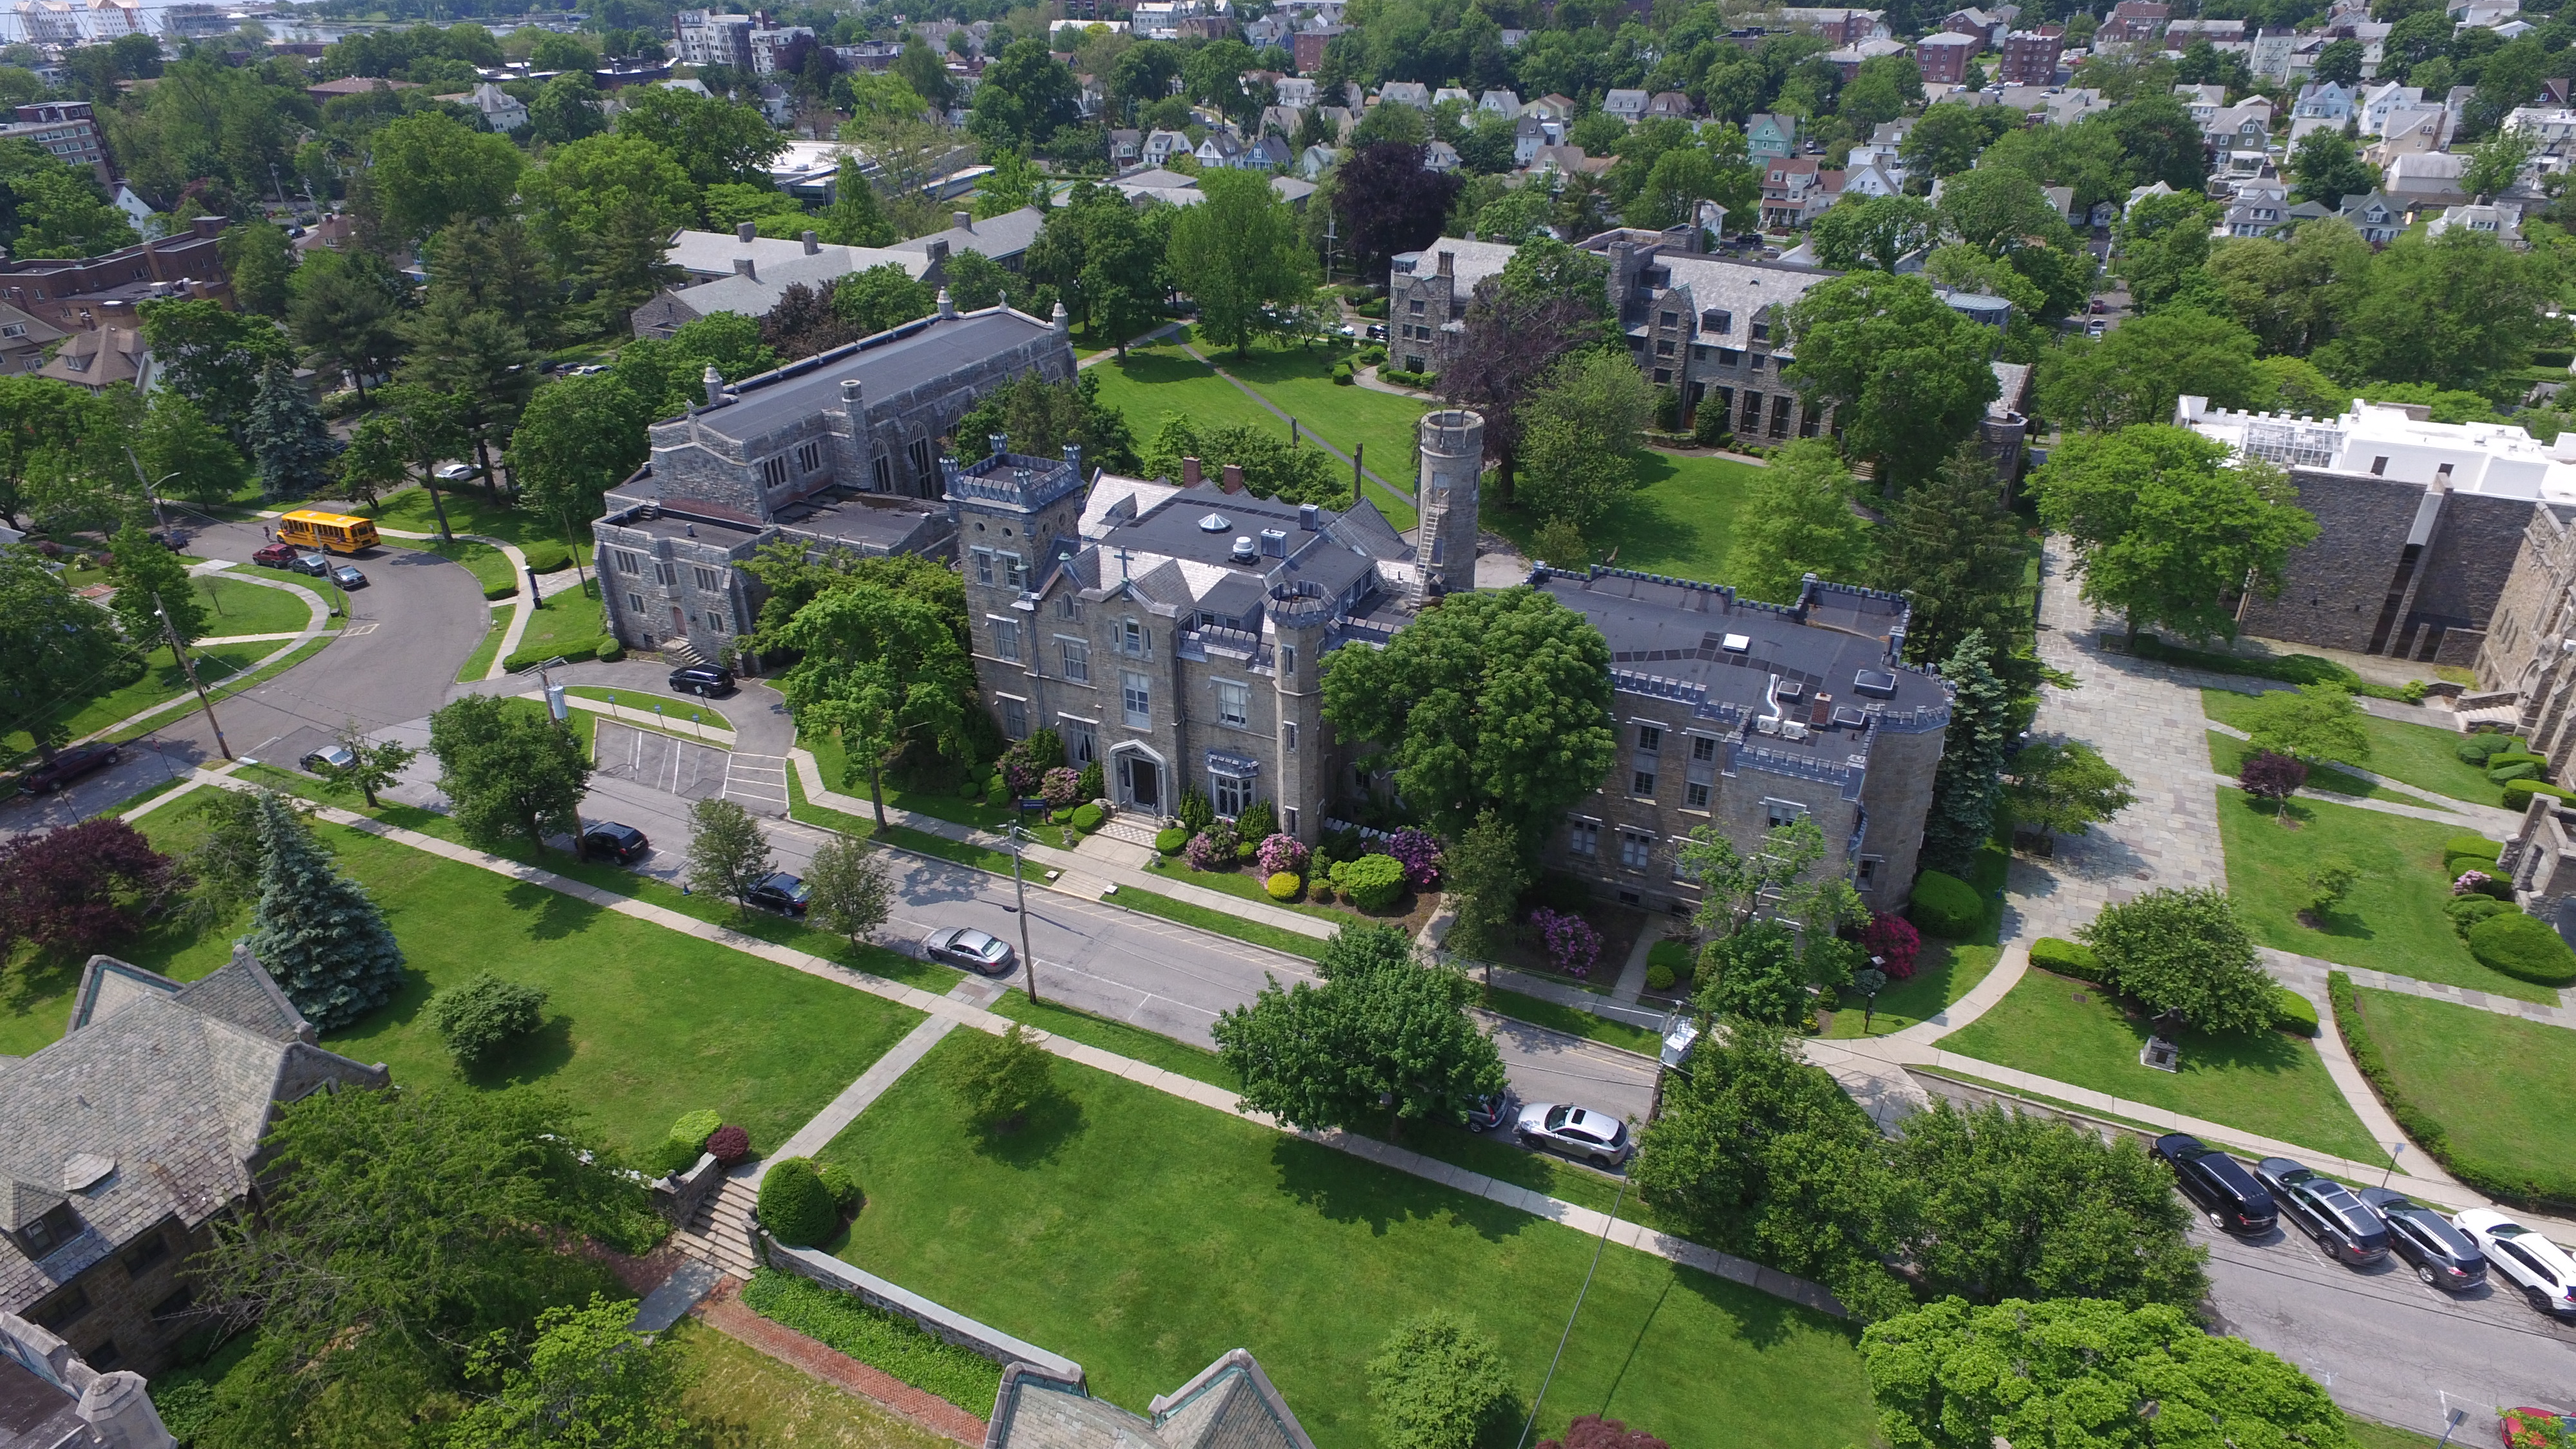 Real estate assets that might be sold could include single buildings, or in the College of New Rochelle's case, a whole campus. A&G Real Estate Partners brokered that deal.